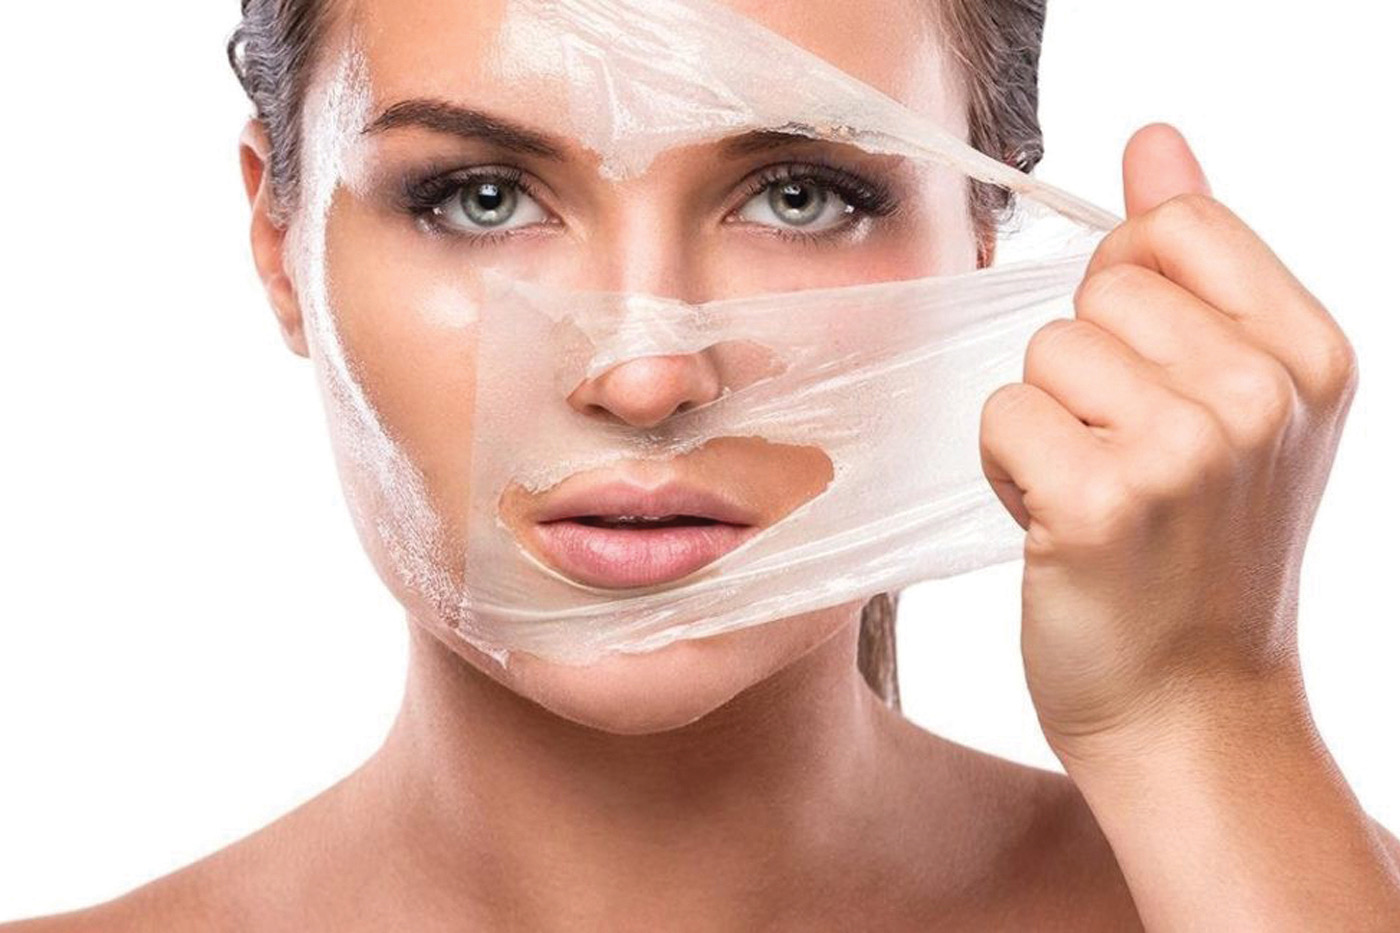 L’Oreal patents self-bubbling peel-off face mask which reduces water consumption